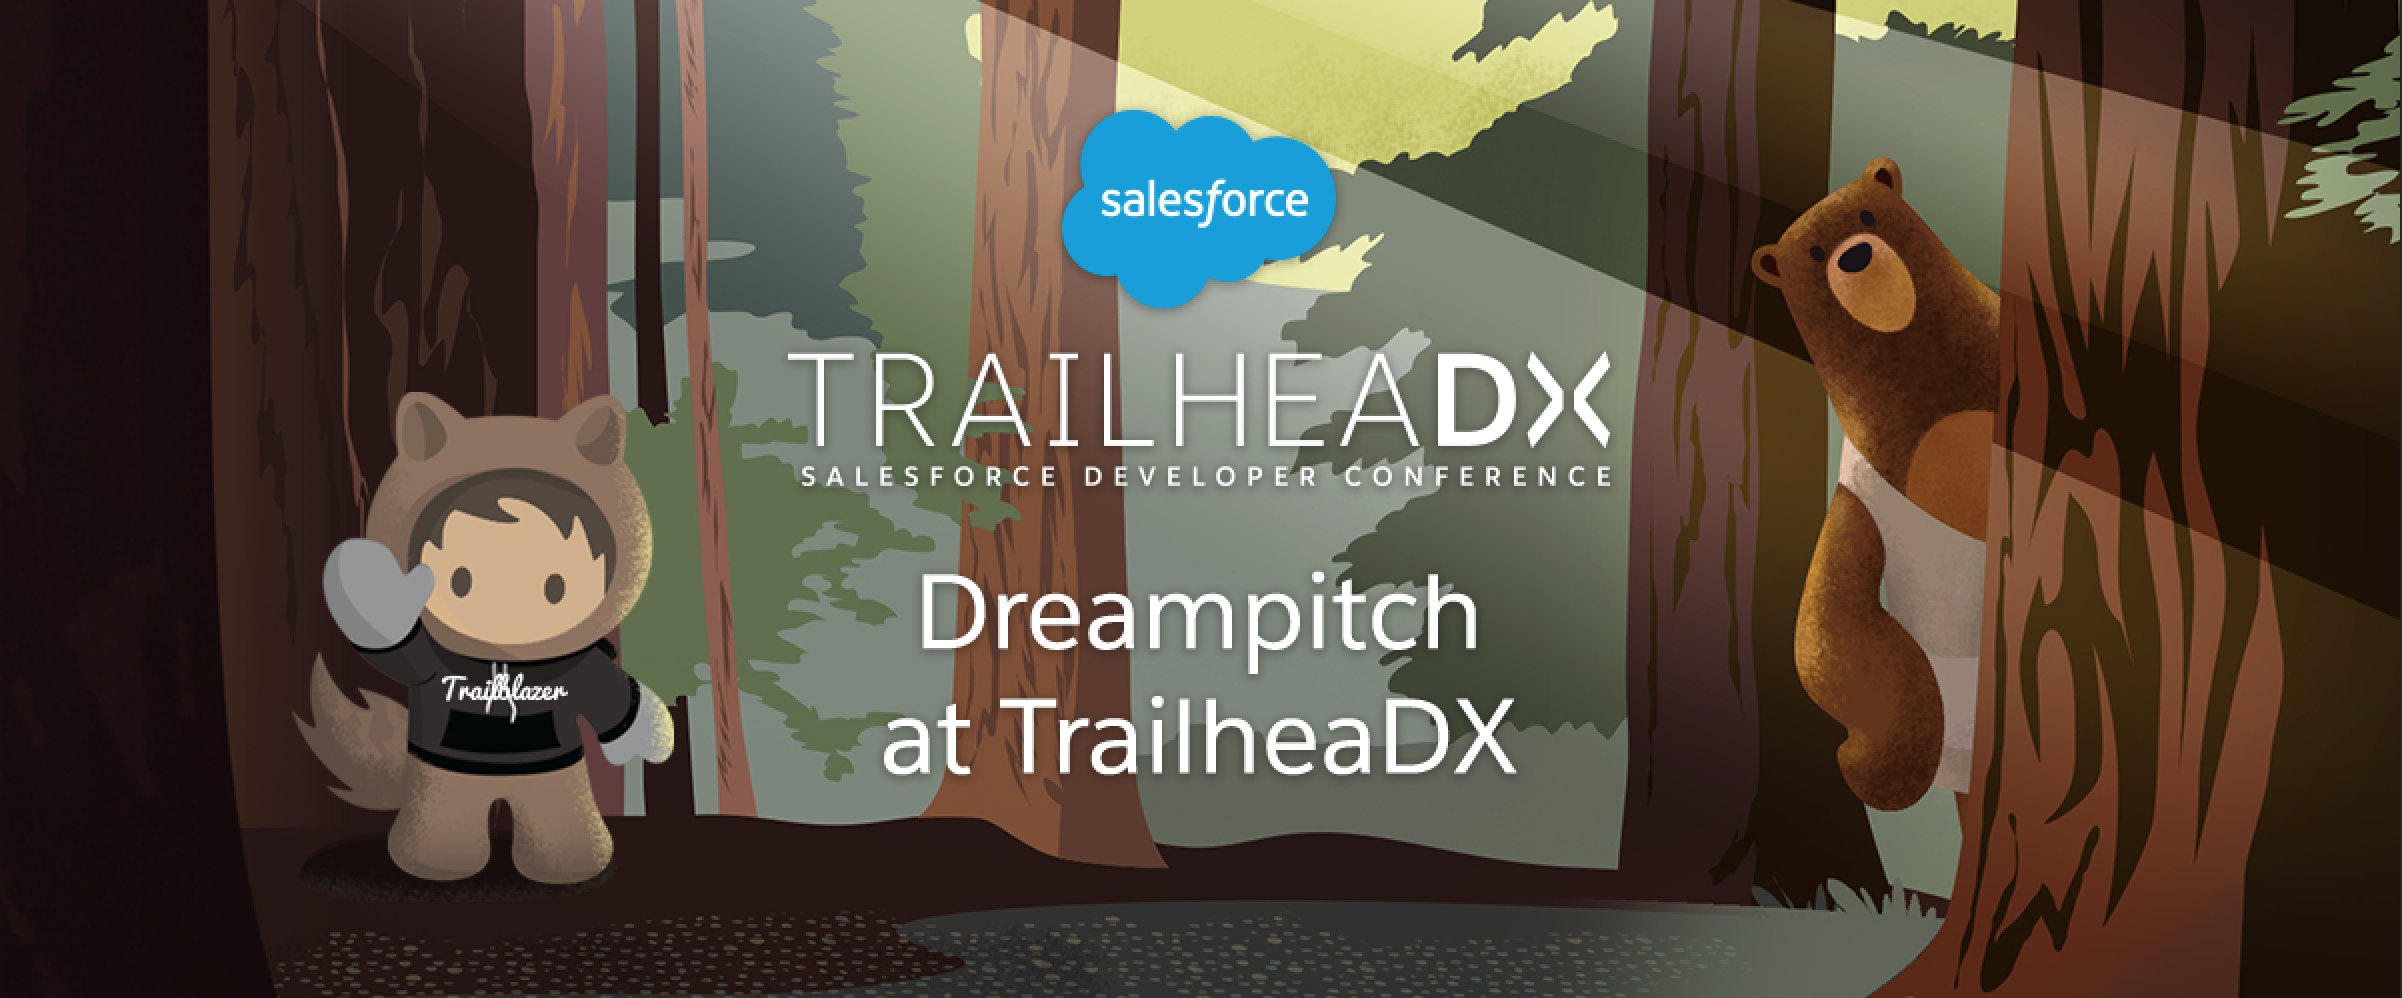 Ready to Pitch Your Startup in Front of Thousands at TrailheaDX?